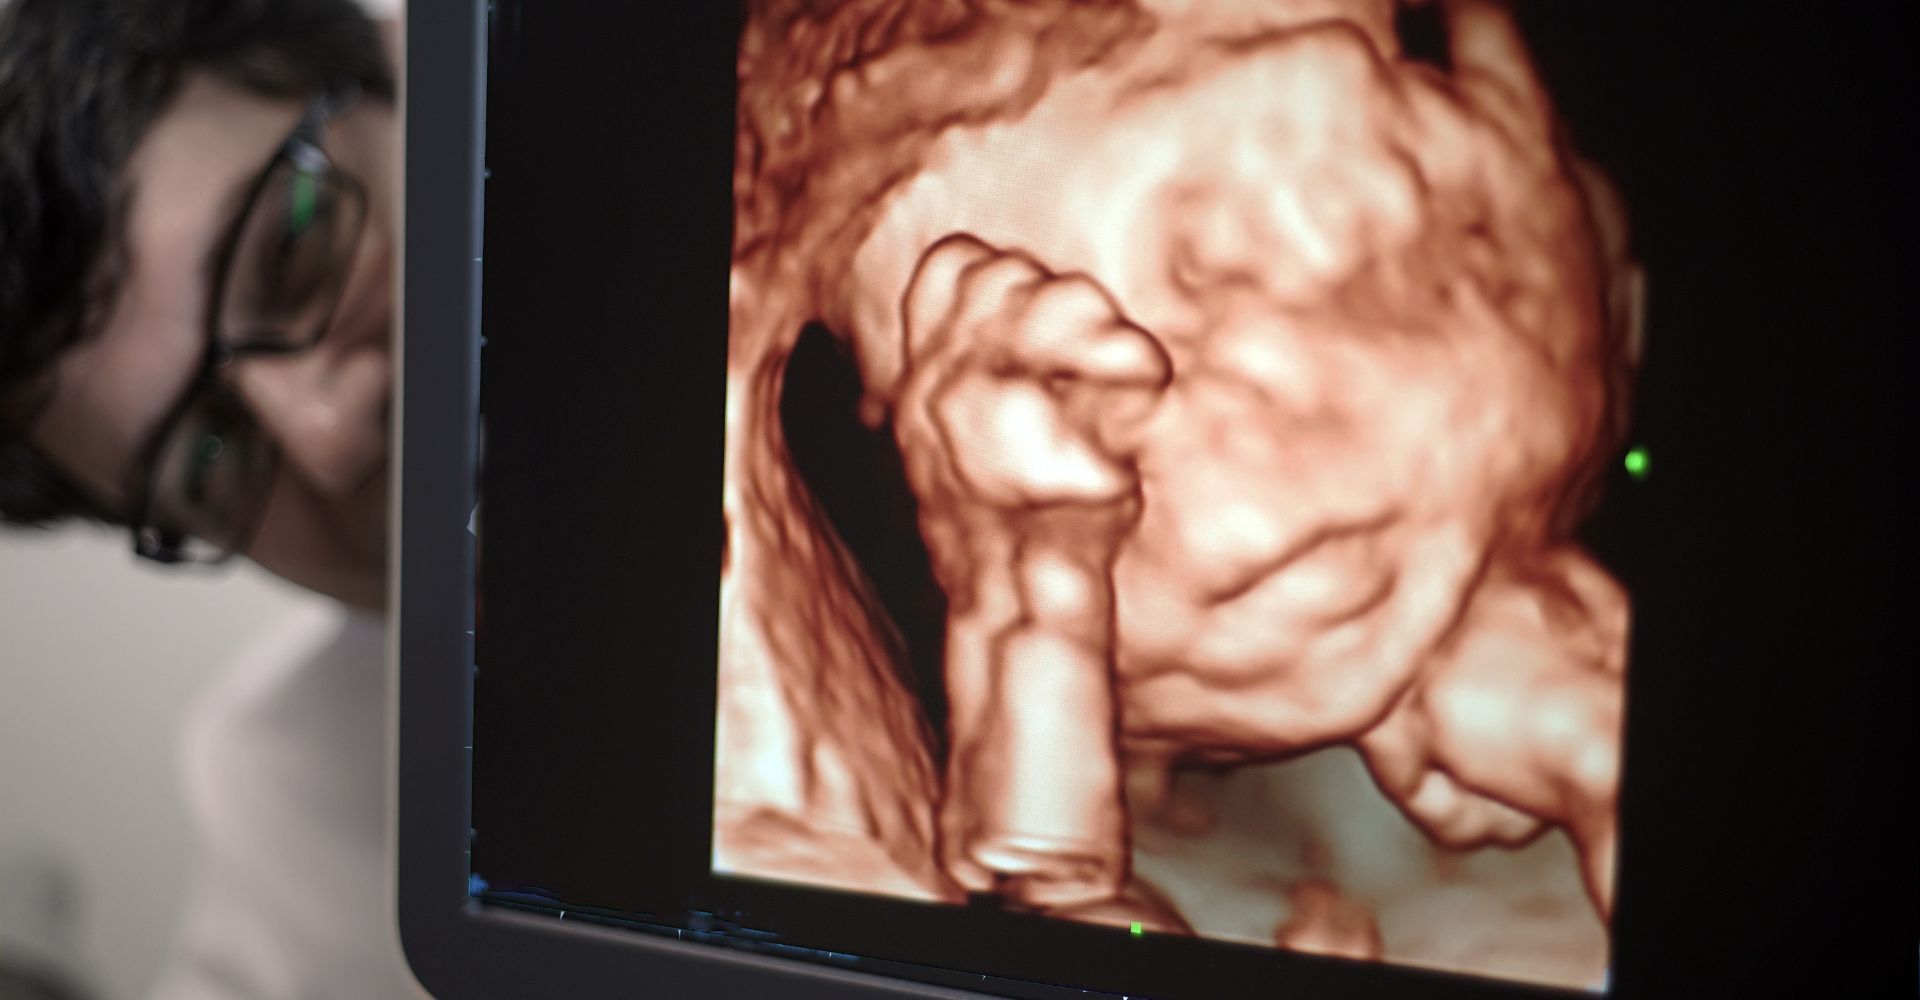 3D ultrasound on monitor